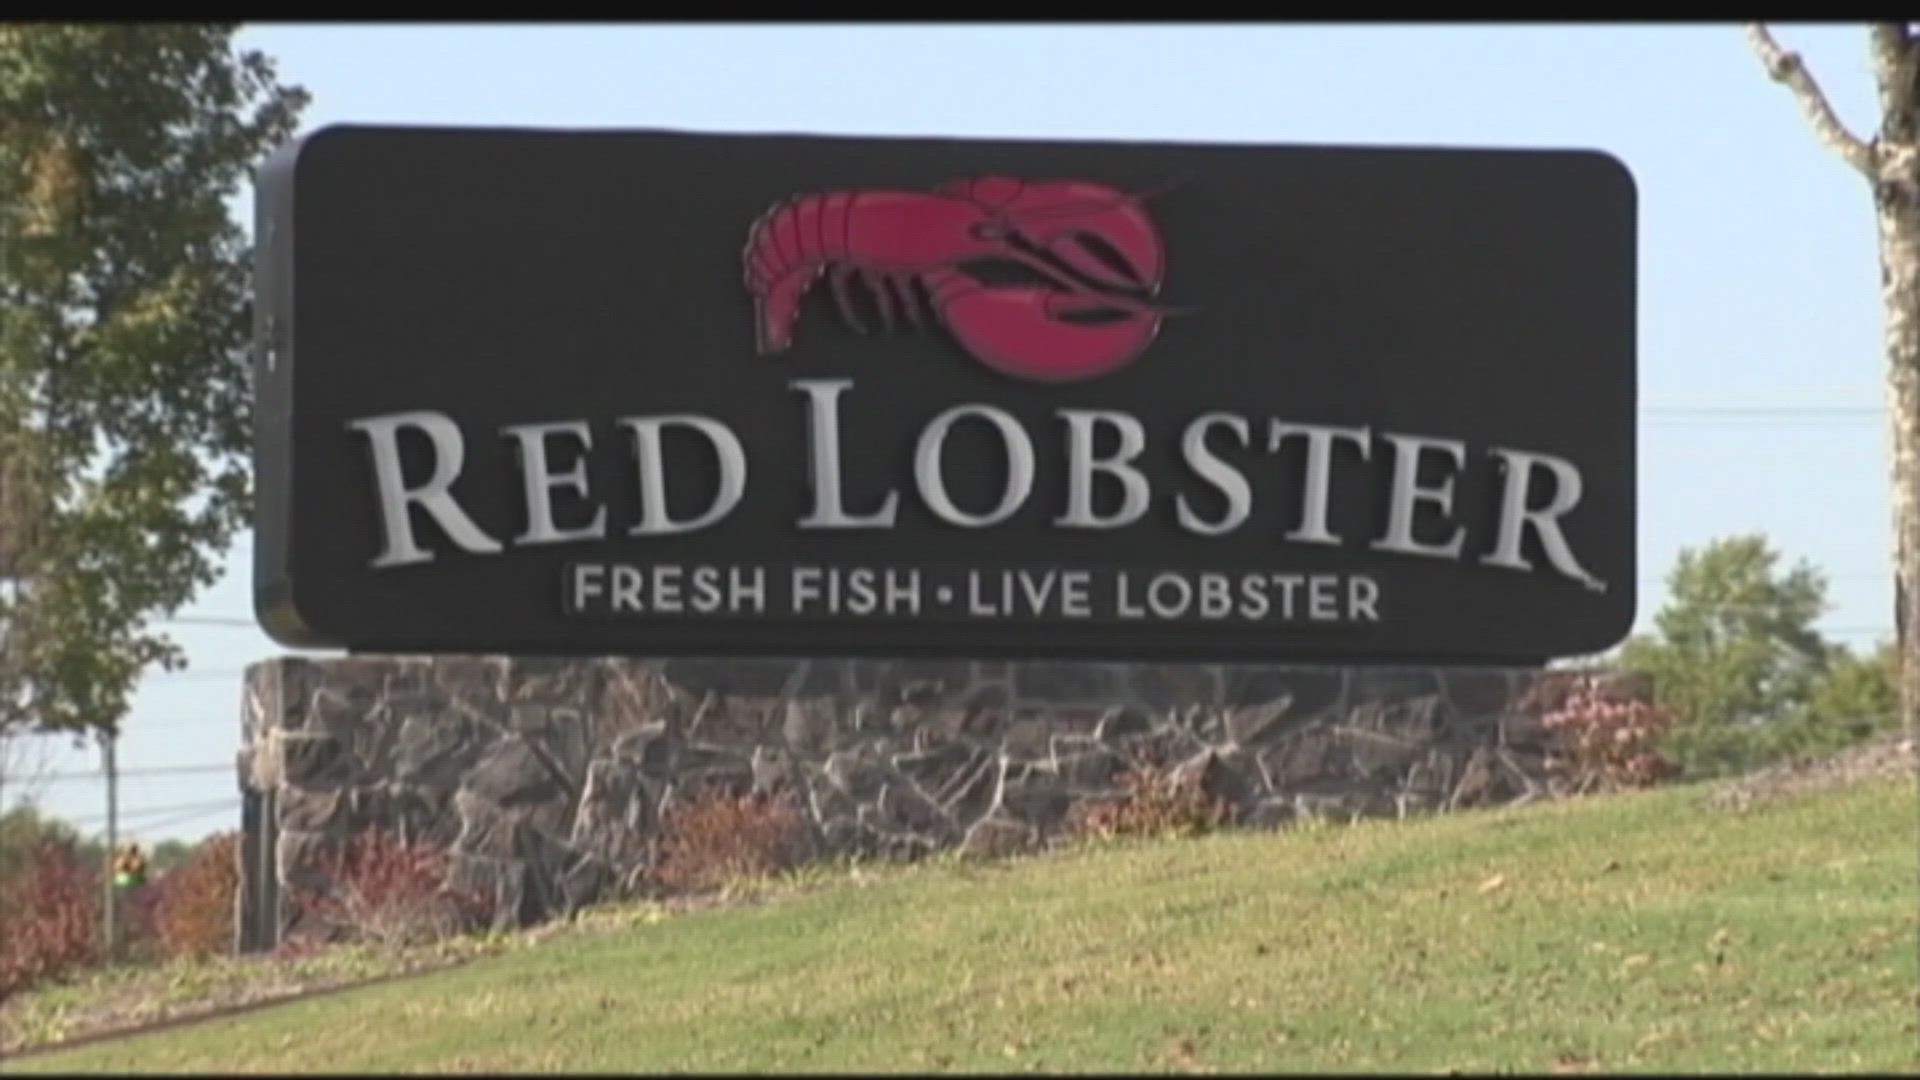 Turns out, Red Lobster's "Ultimate Endless Shrimp" is too popular and the seafood chain is floundering a bit.